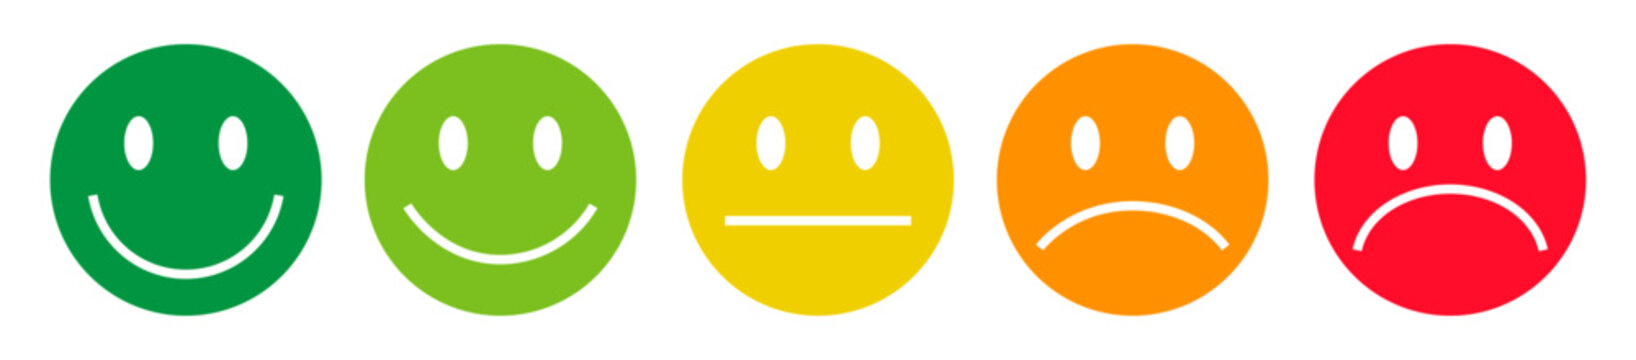 Emoji face solid icons design collection. Good and bad mood expression symbol.	